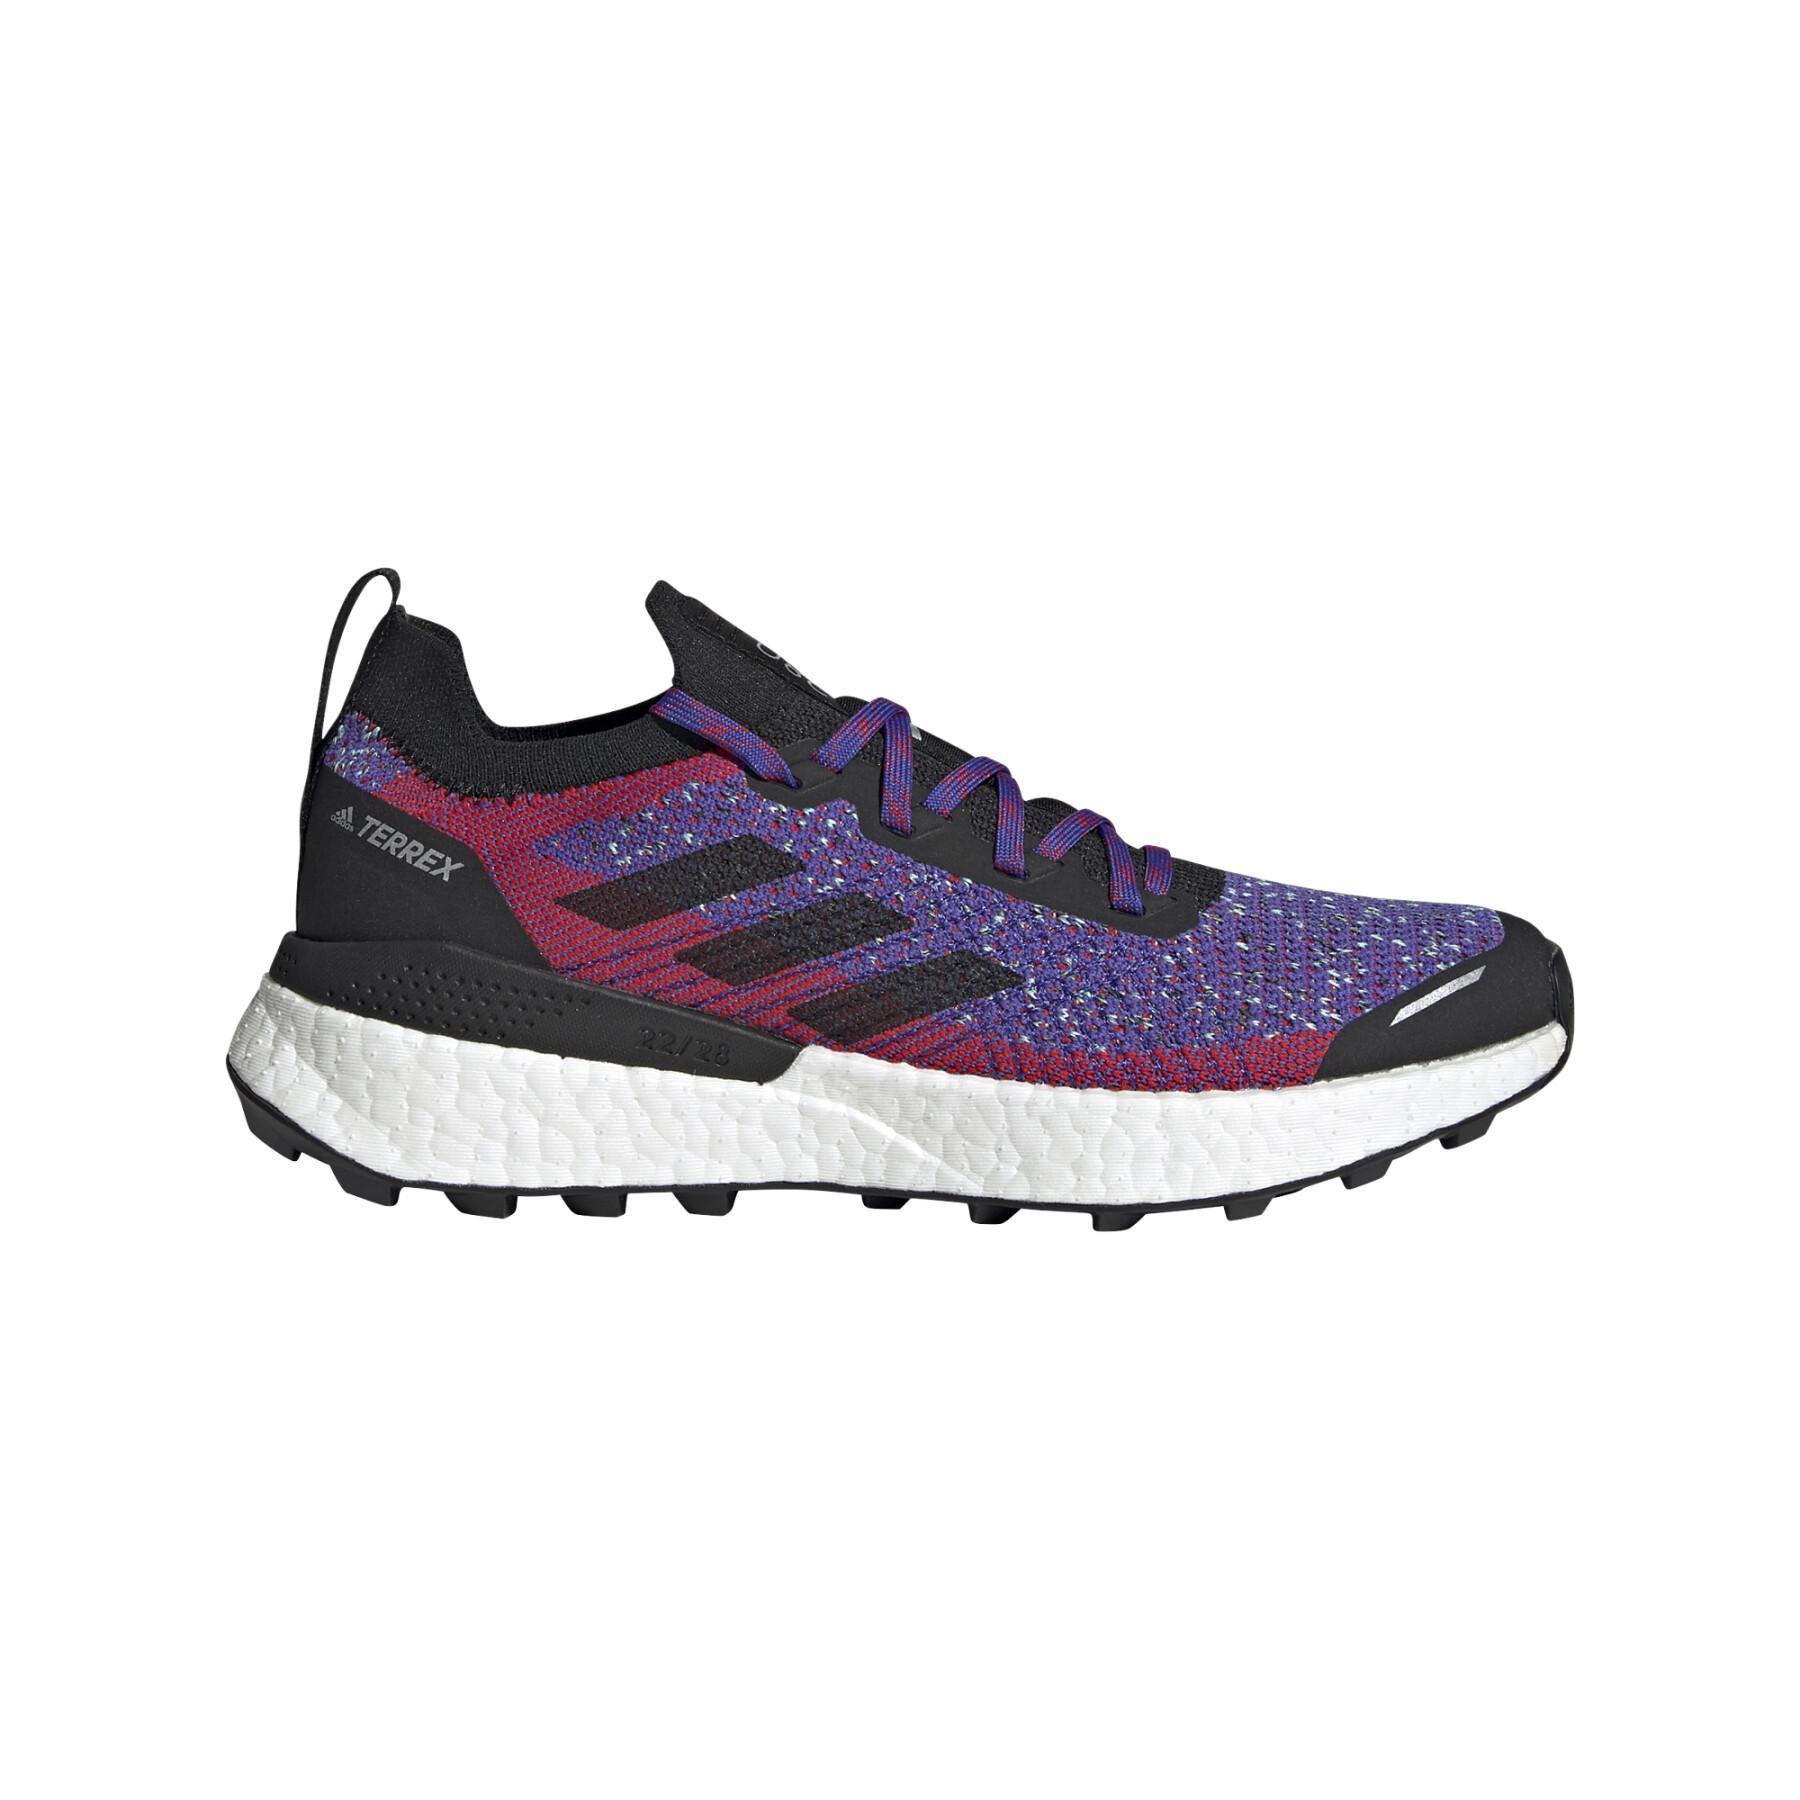 Women's trail shoes adidas Terrex Two Ultra Parley